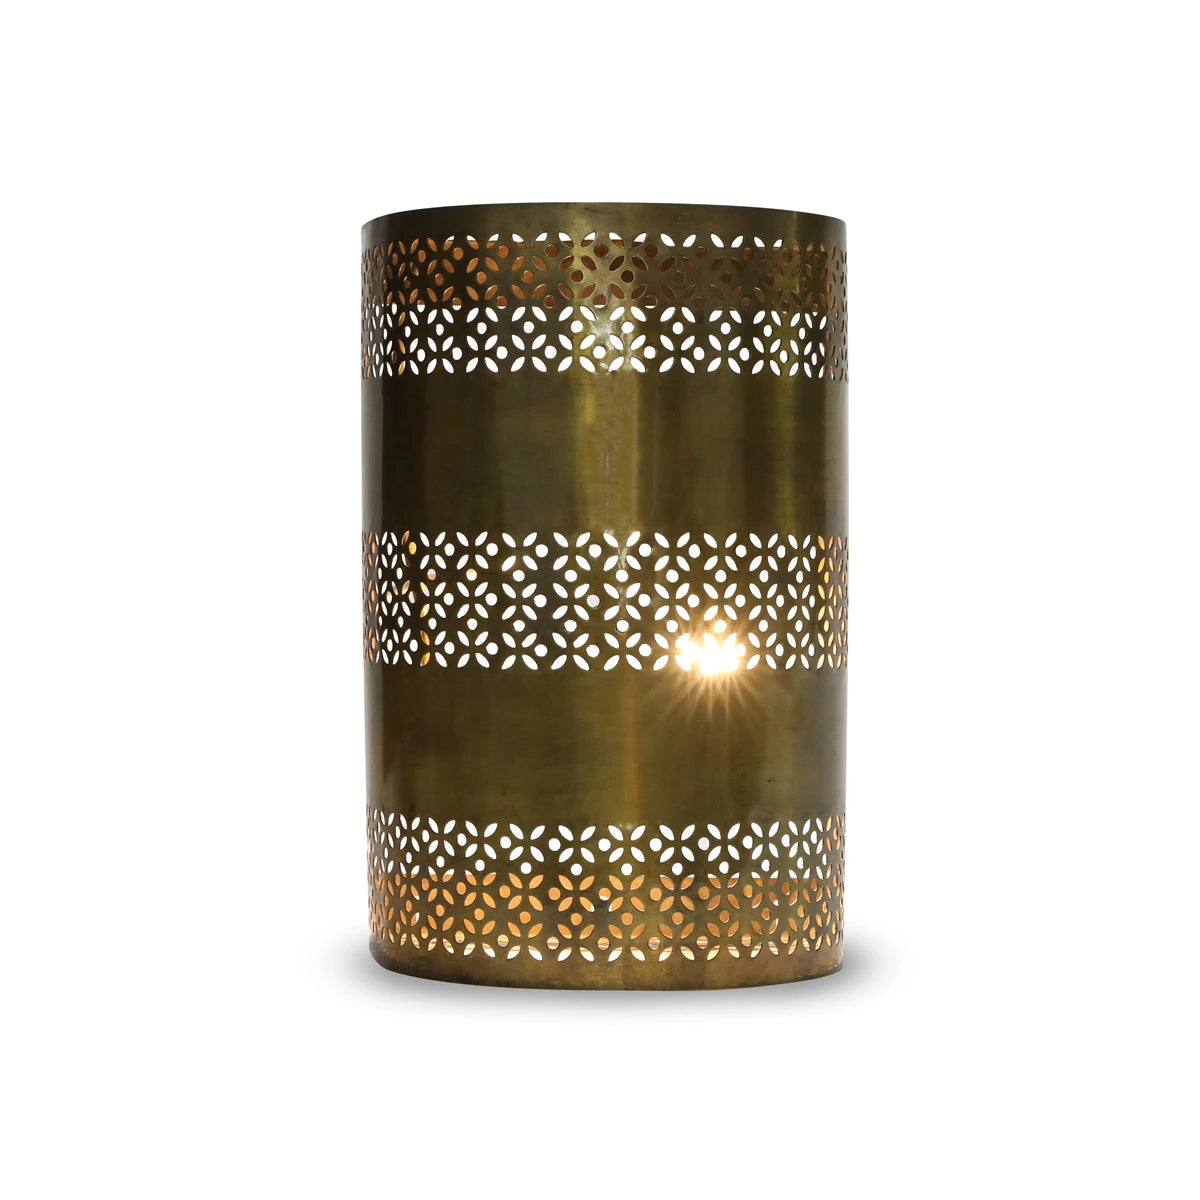 Front View of Perforated Decorative Indoor Wall Sconce with Lights on